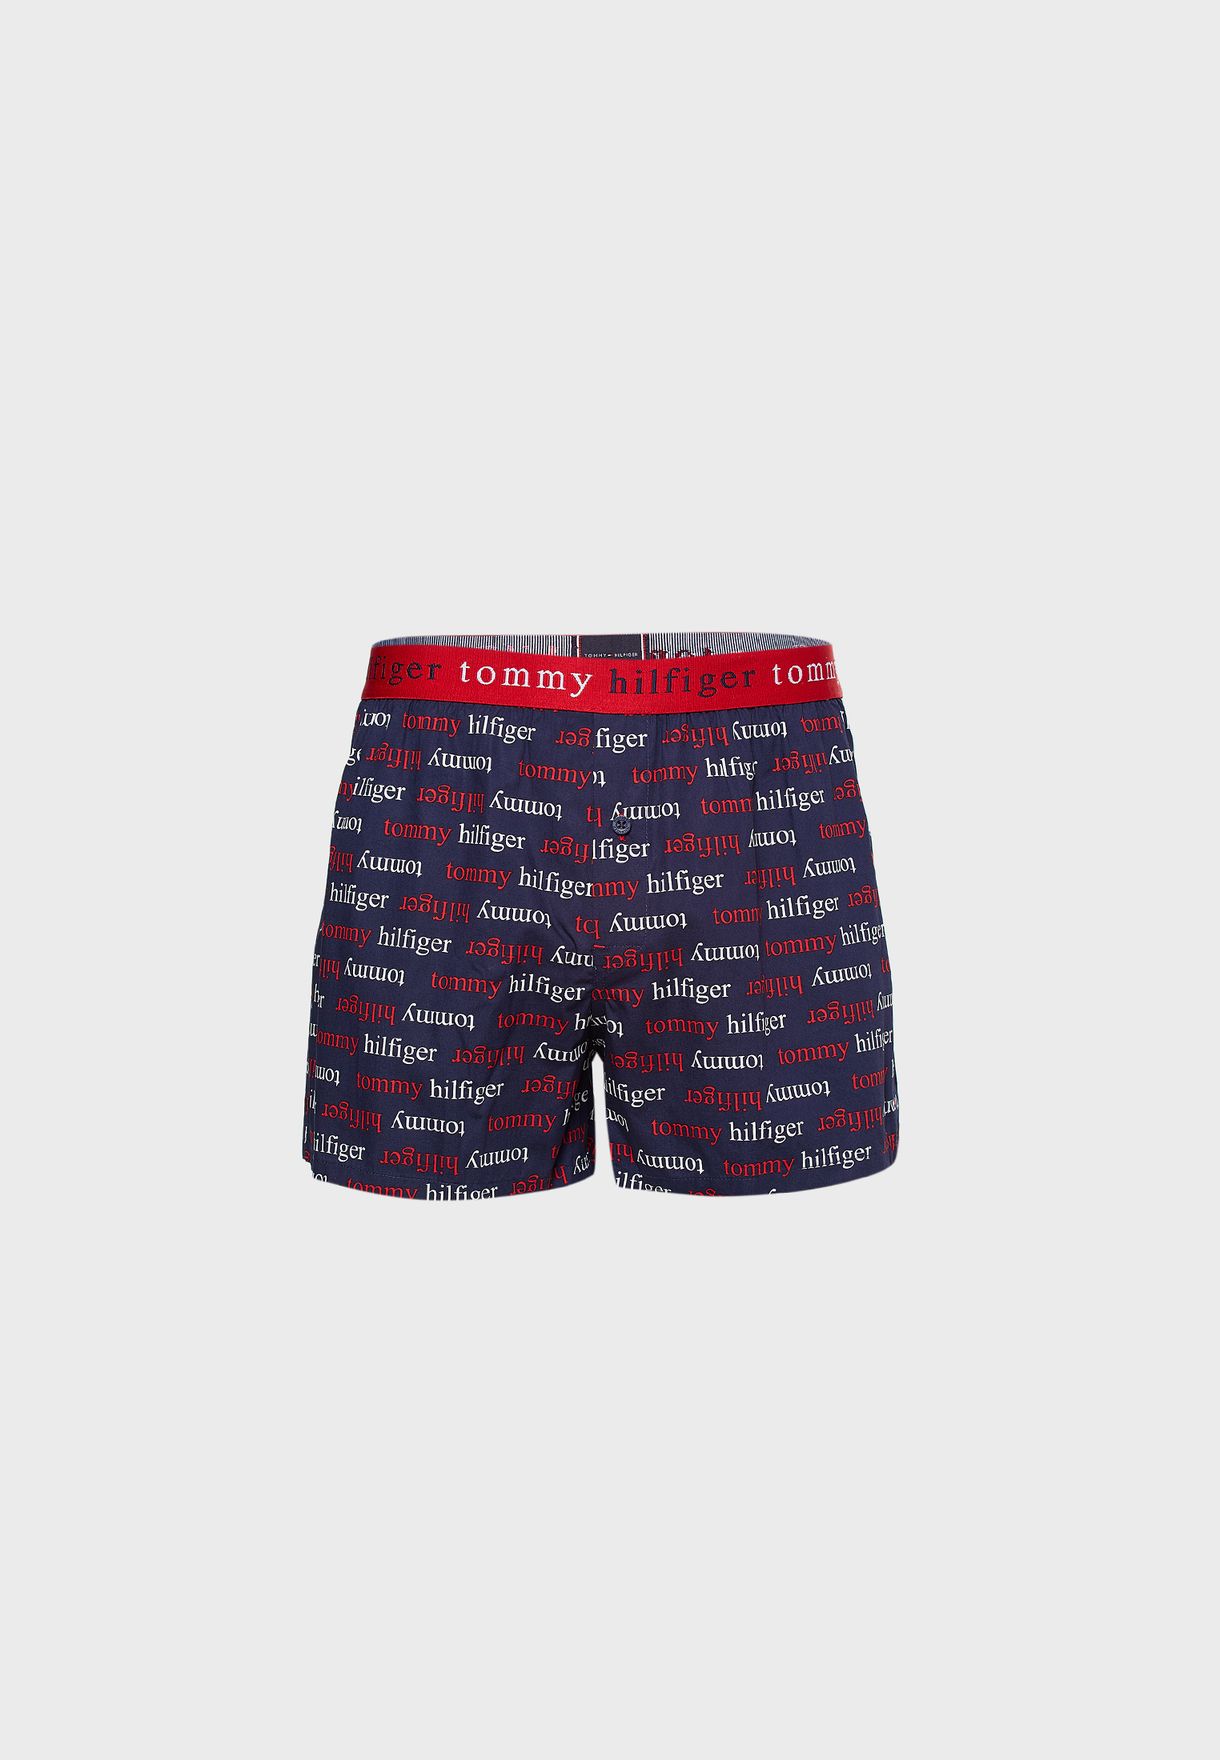 tommy hilfiger trunks india